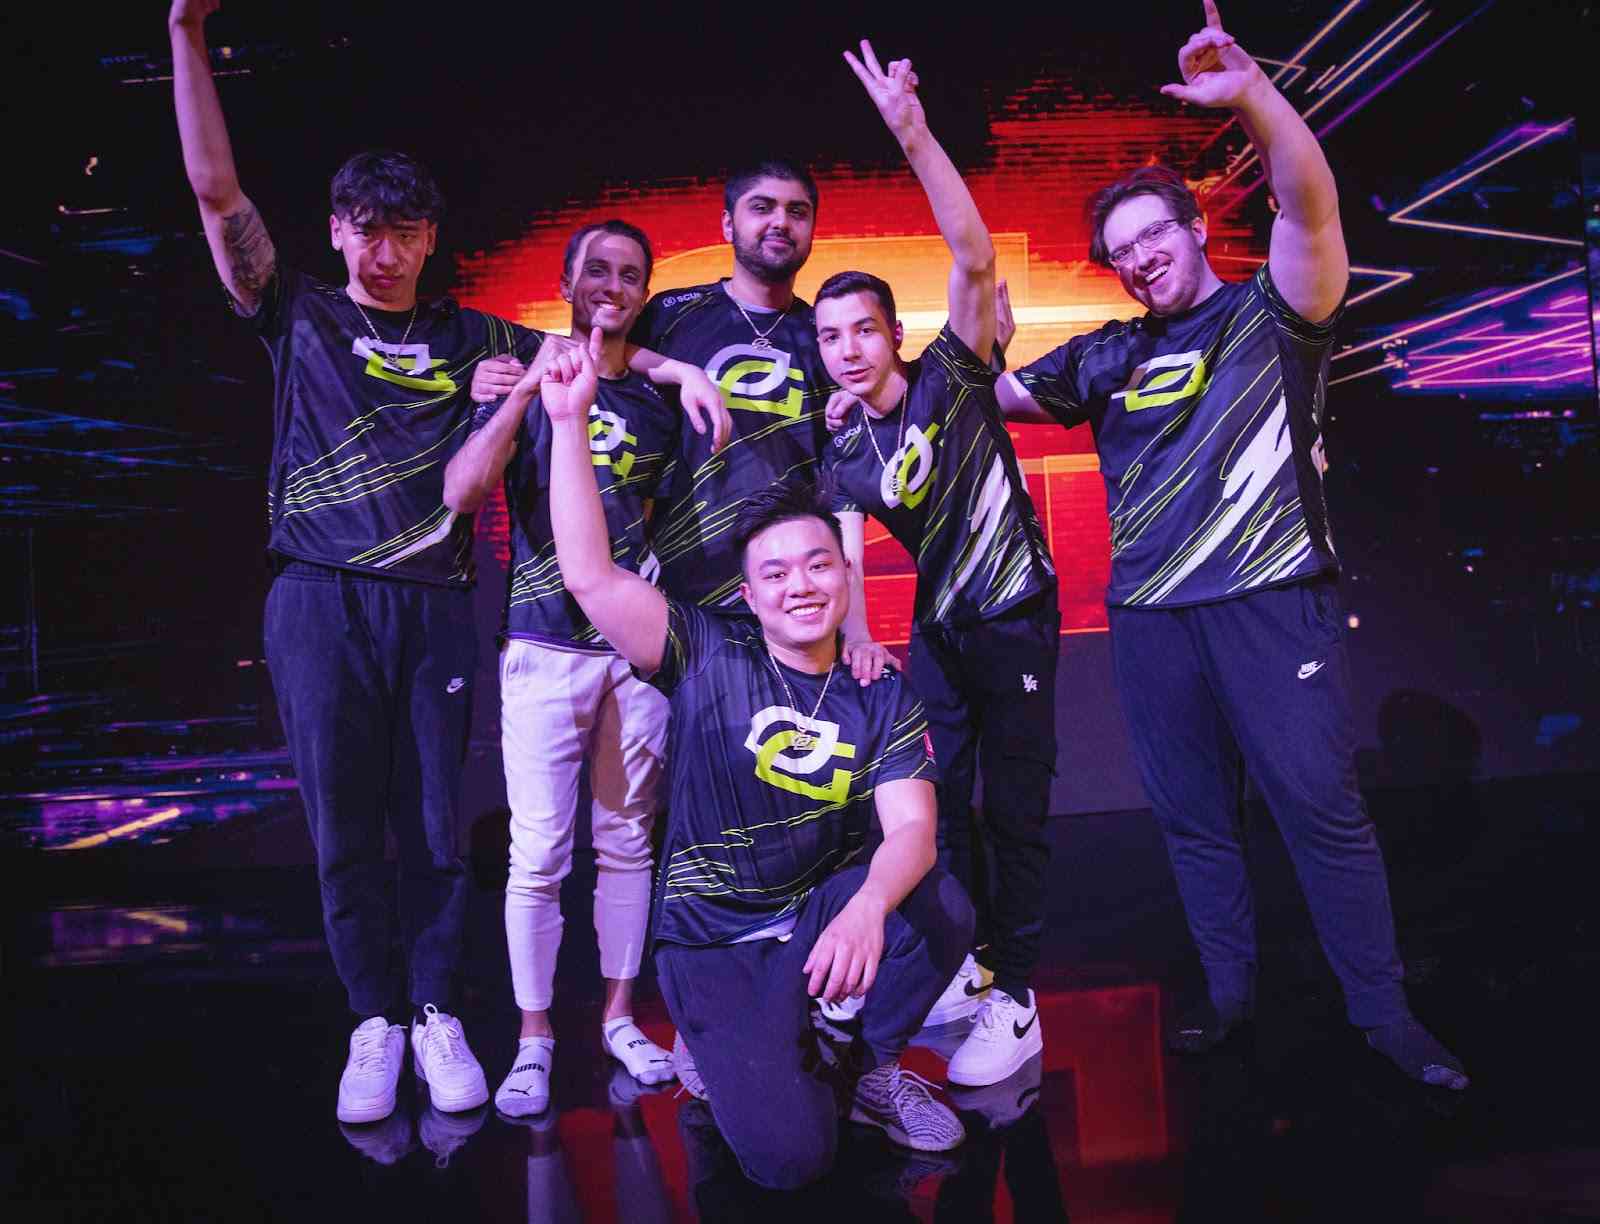 The Valorant roster for OpTic Gaming stand on stage with fists raised in a victory pose